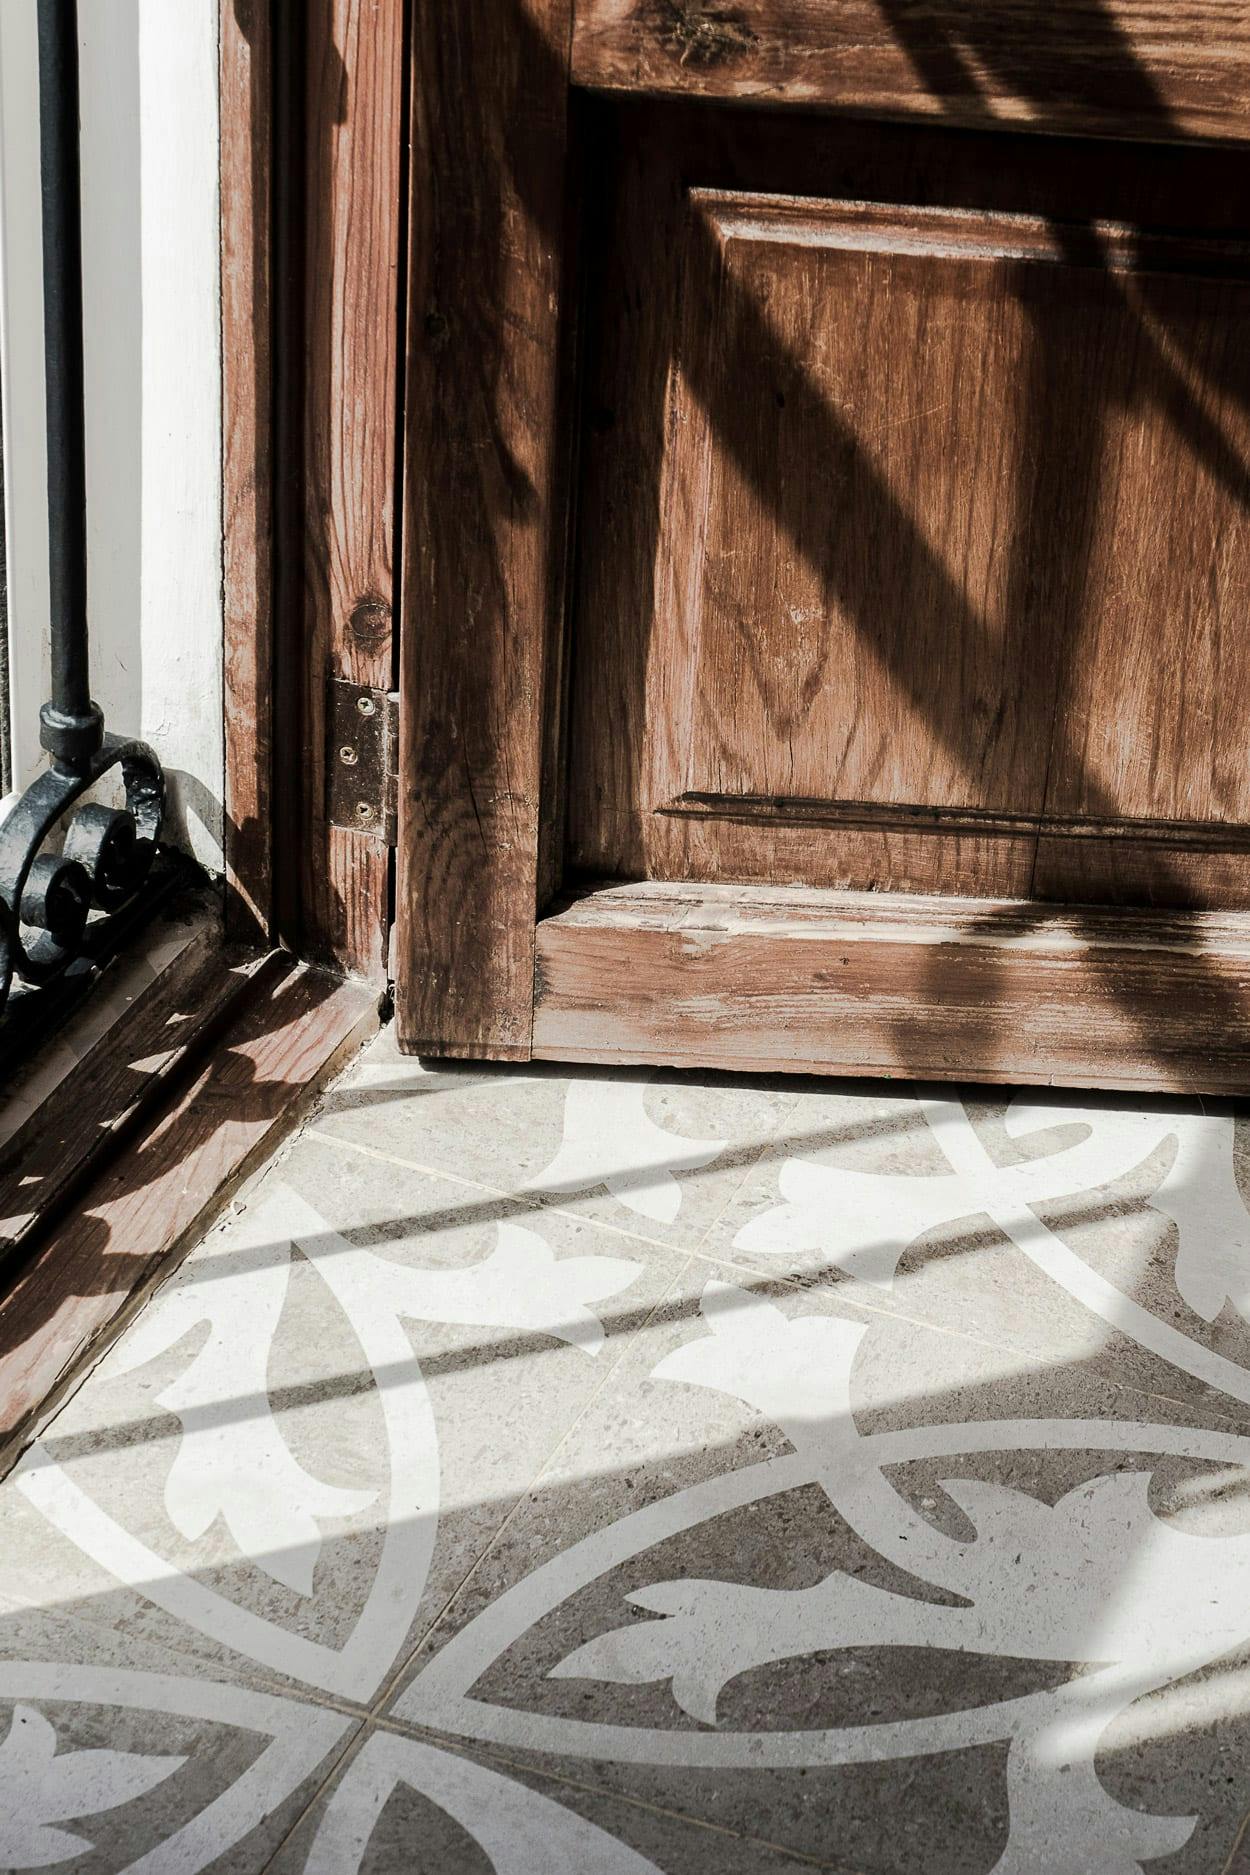 A wooden door with a black and white checkered pattern is open, revealing a shadow on the doorstep.